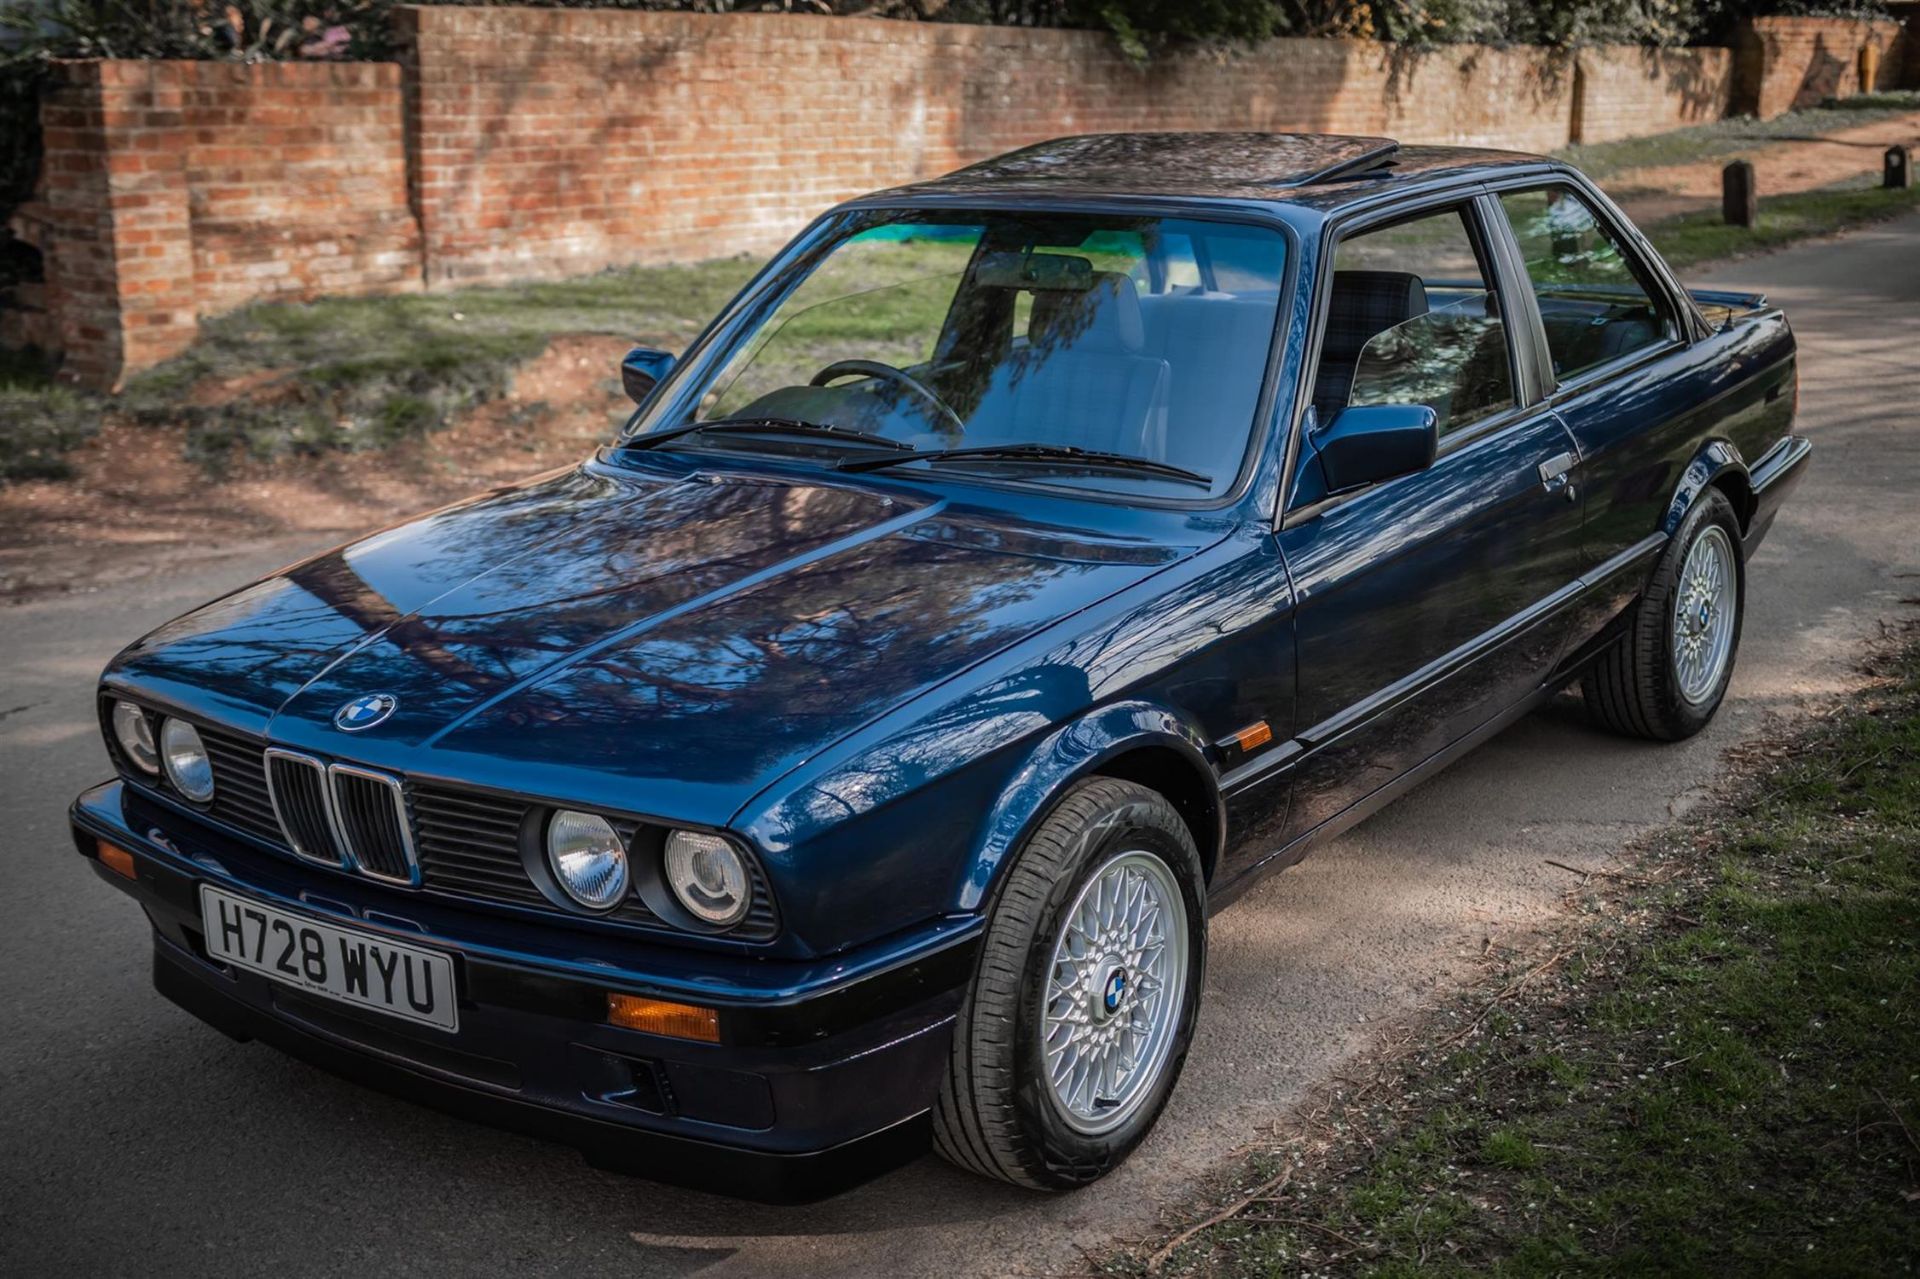 1990 BMW 318is Coupé (E30) - Image 10 of 10